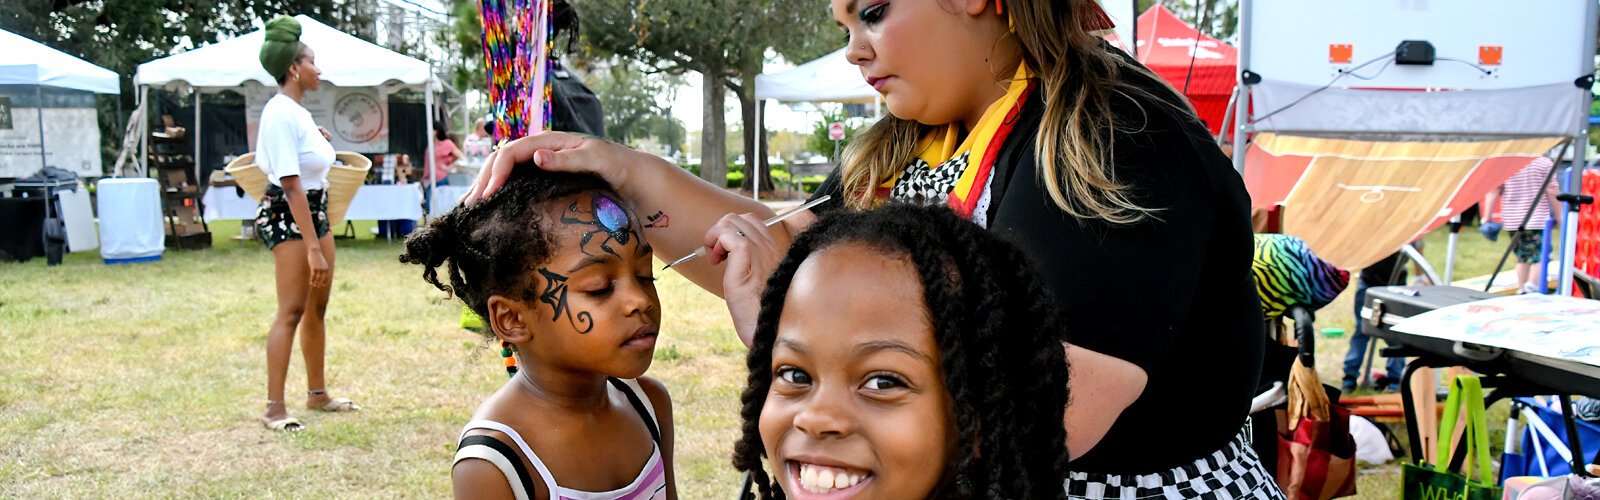 Five-year-old Precious gets her face painted by Lily of “Daisy and Lily’s Face Painting" at the Tampa Bay VegFest as big sister Angel awaits her turn with a big smile of anticipation.